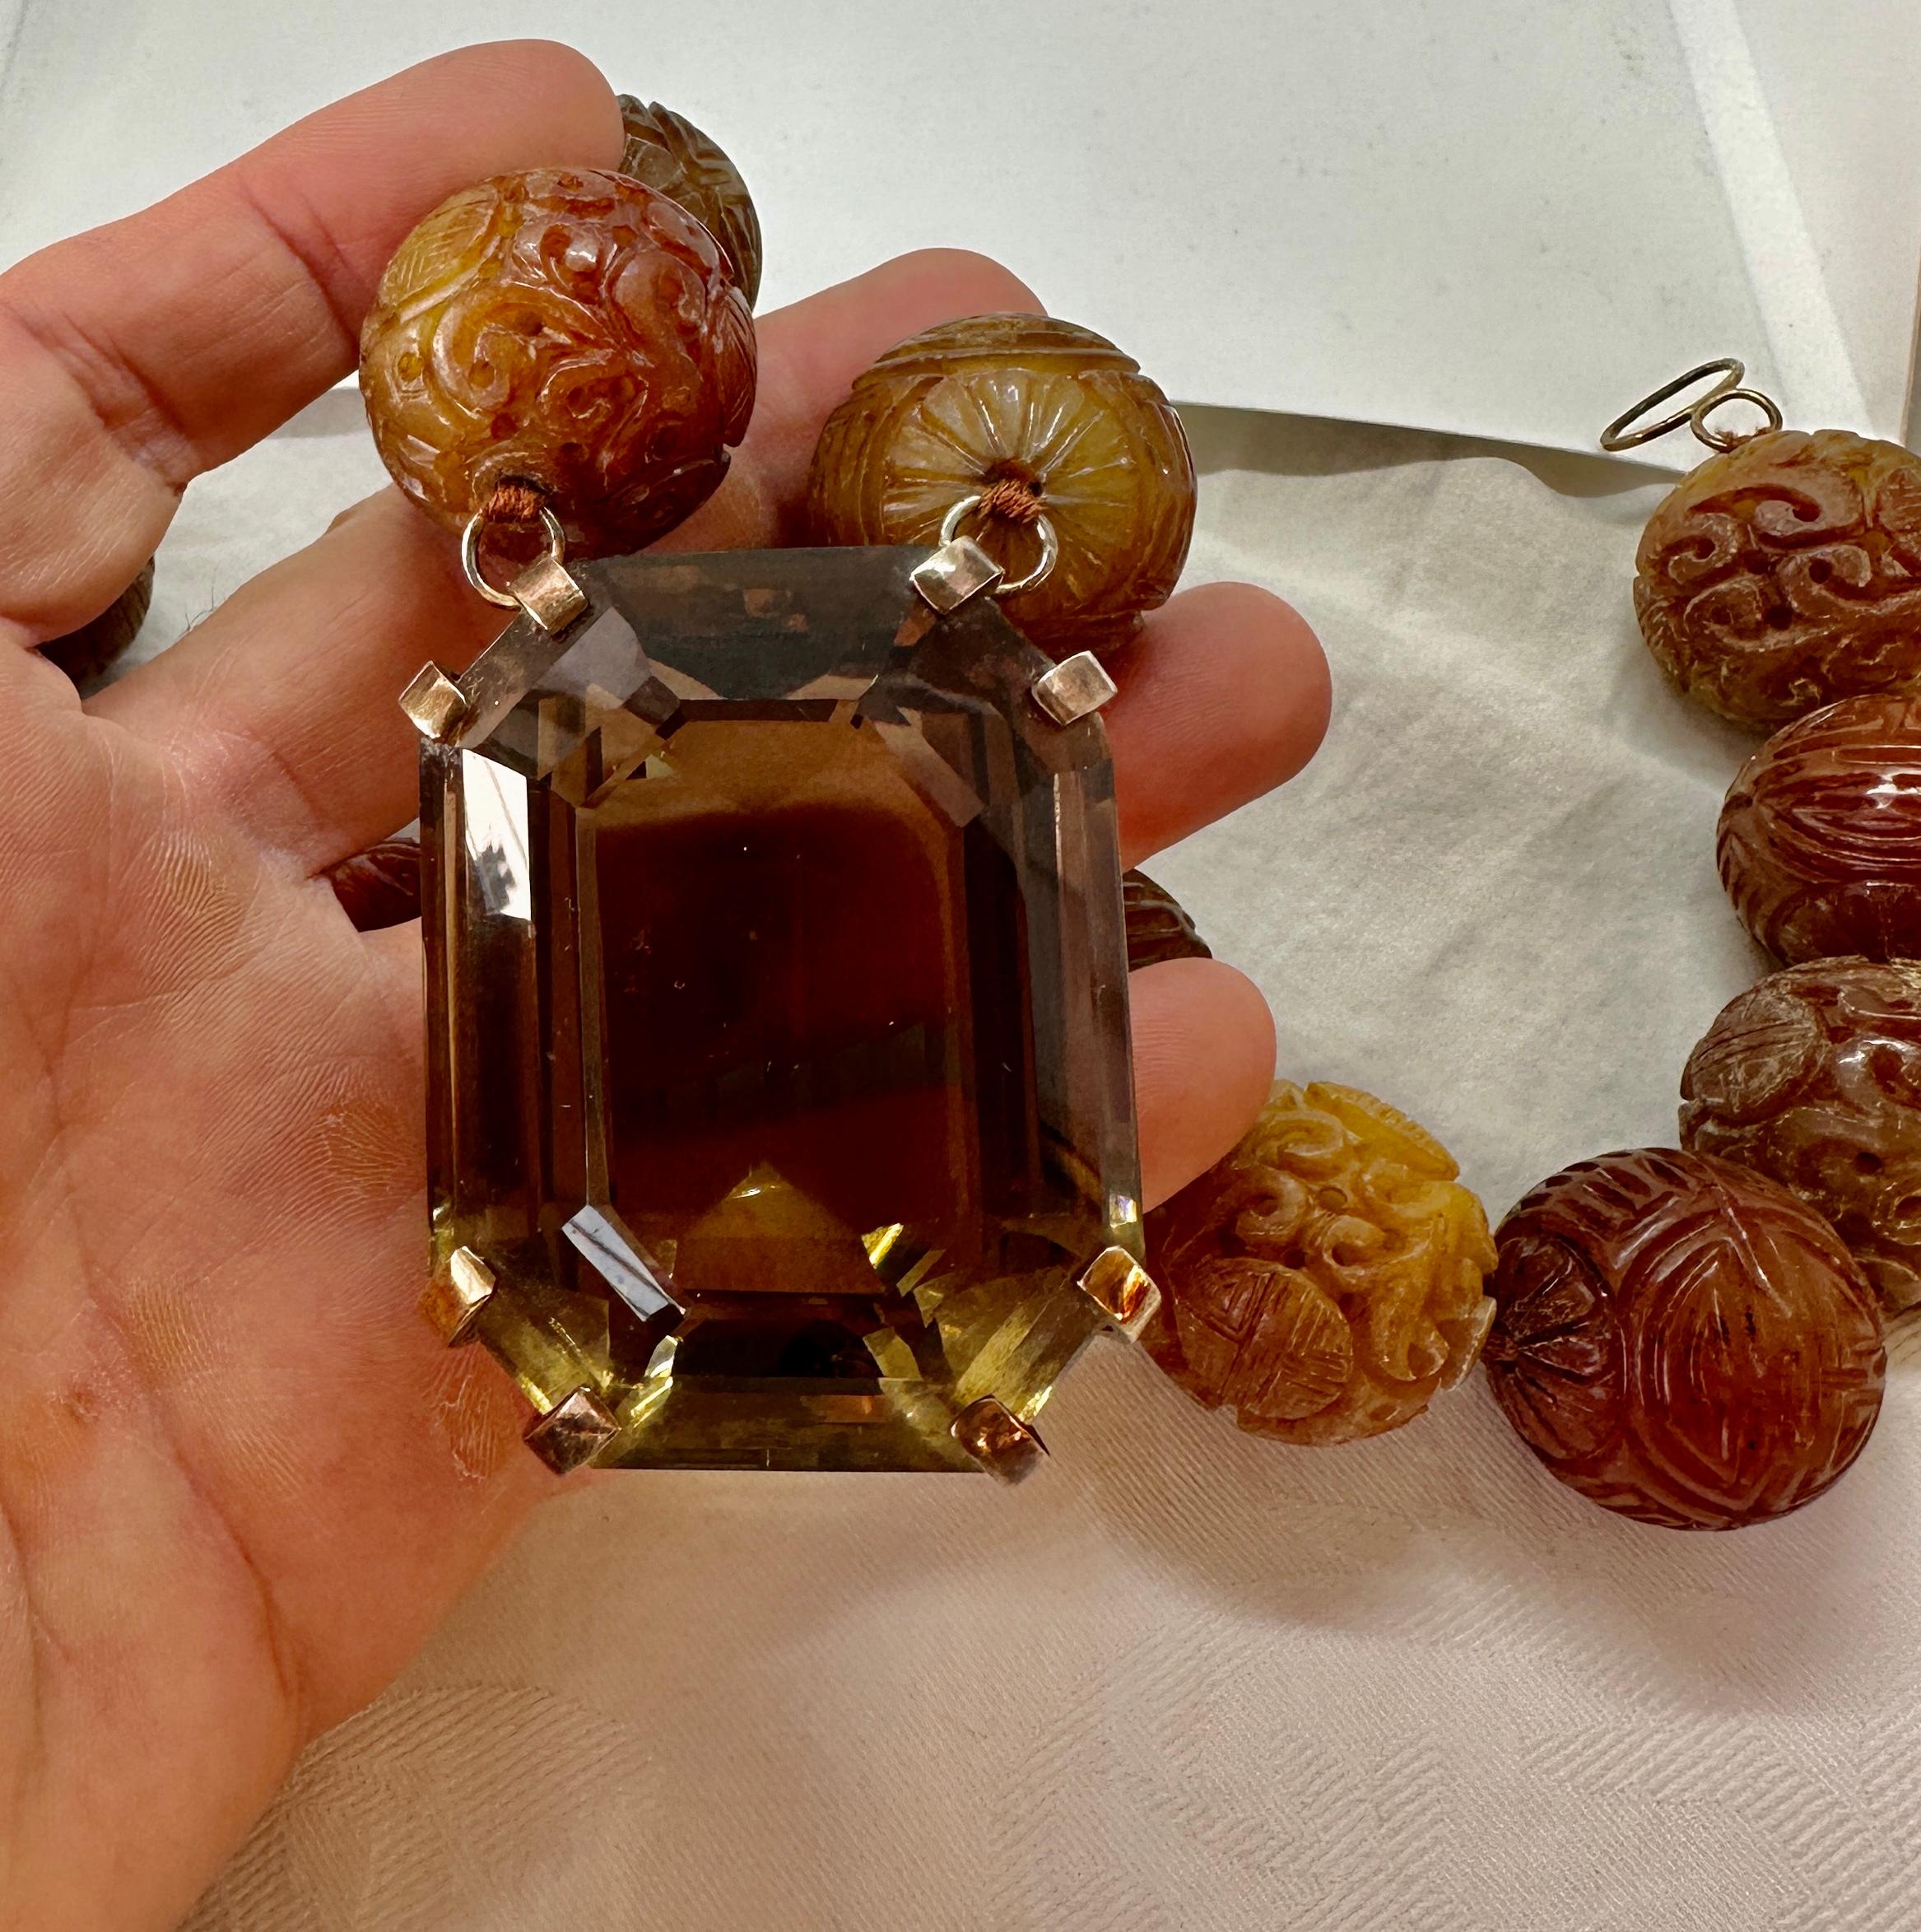 THIS IS A SPECTACULAR AND RARE ANTIQUE 750 CARAT SMOKY TOPAZ AND LARGE CARVED JADE BEAD PENDANT NECKLACE FROM THE ESTATE OF HOLLYWOOD ACTRESS MARY LOU DAVES WITH AN ABSOLUTELY EXTRAORDINARY MONUMENTAL EMERALD CUT 750 CARAT SMOKY QUARTZ.  THE SMOKY